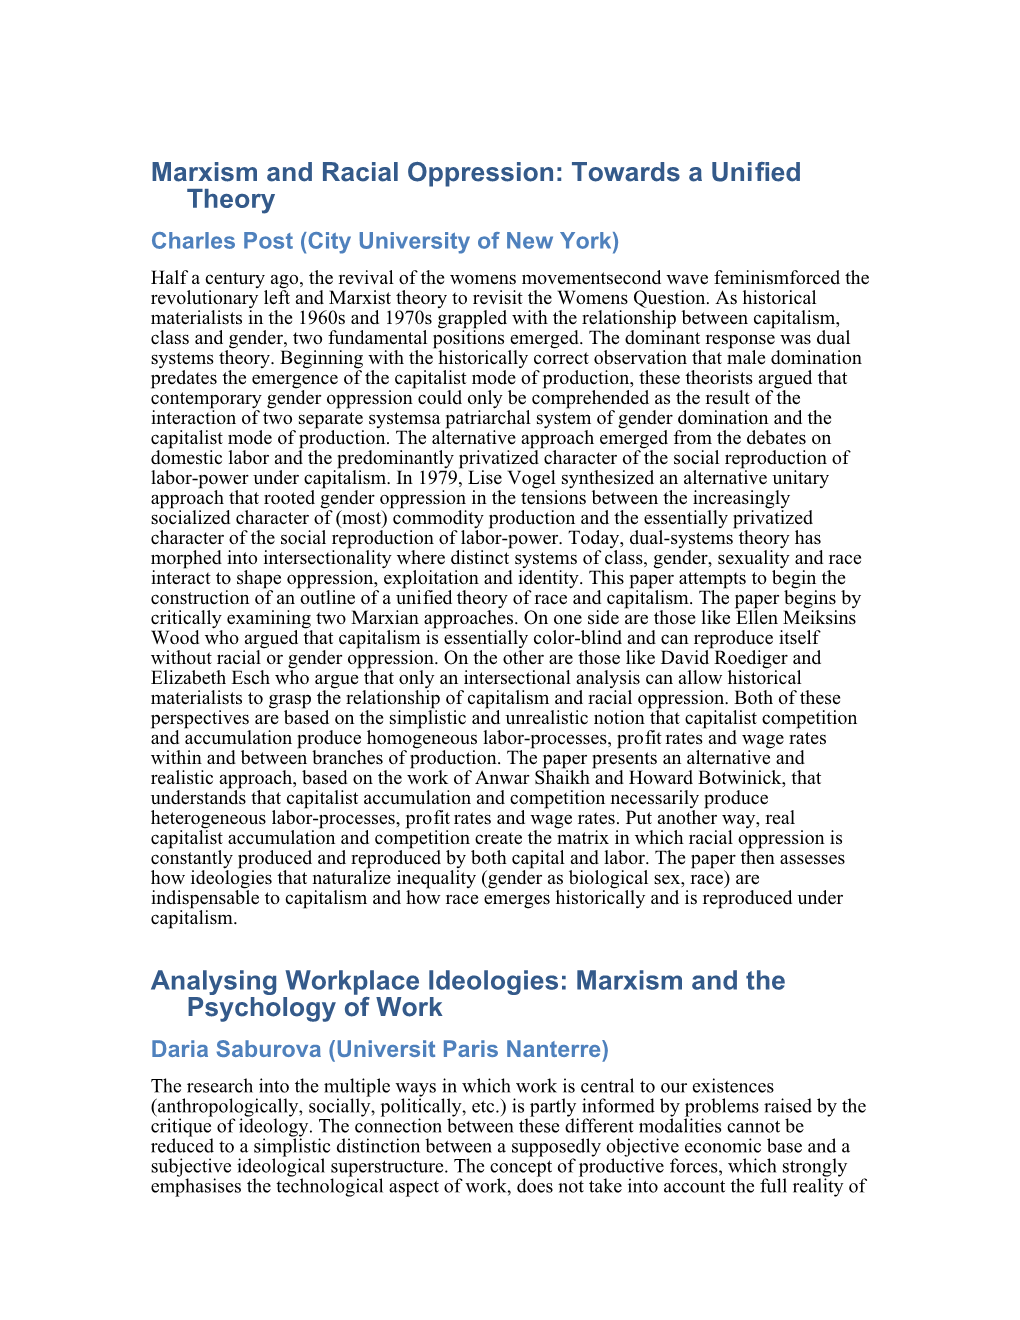 Marxism and Racial Oppression: Towards a Unified Theory Analysing Workplace Ideologies